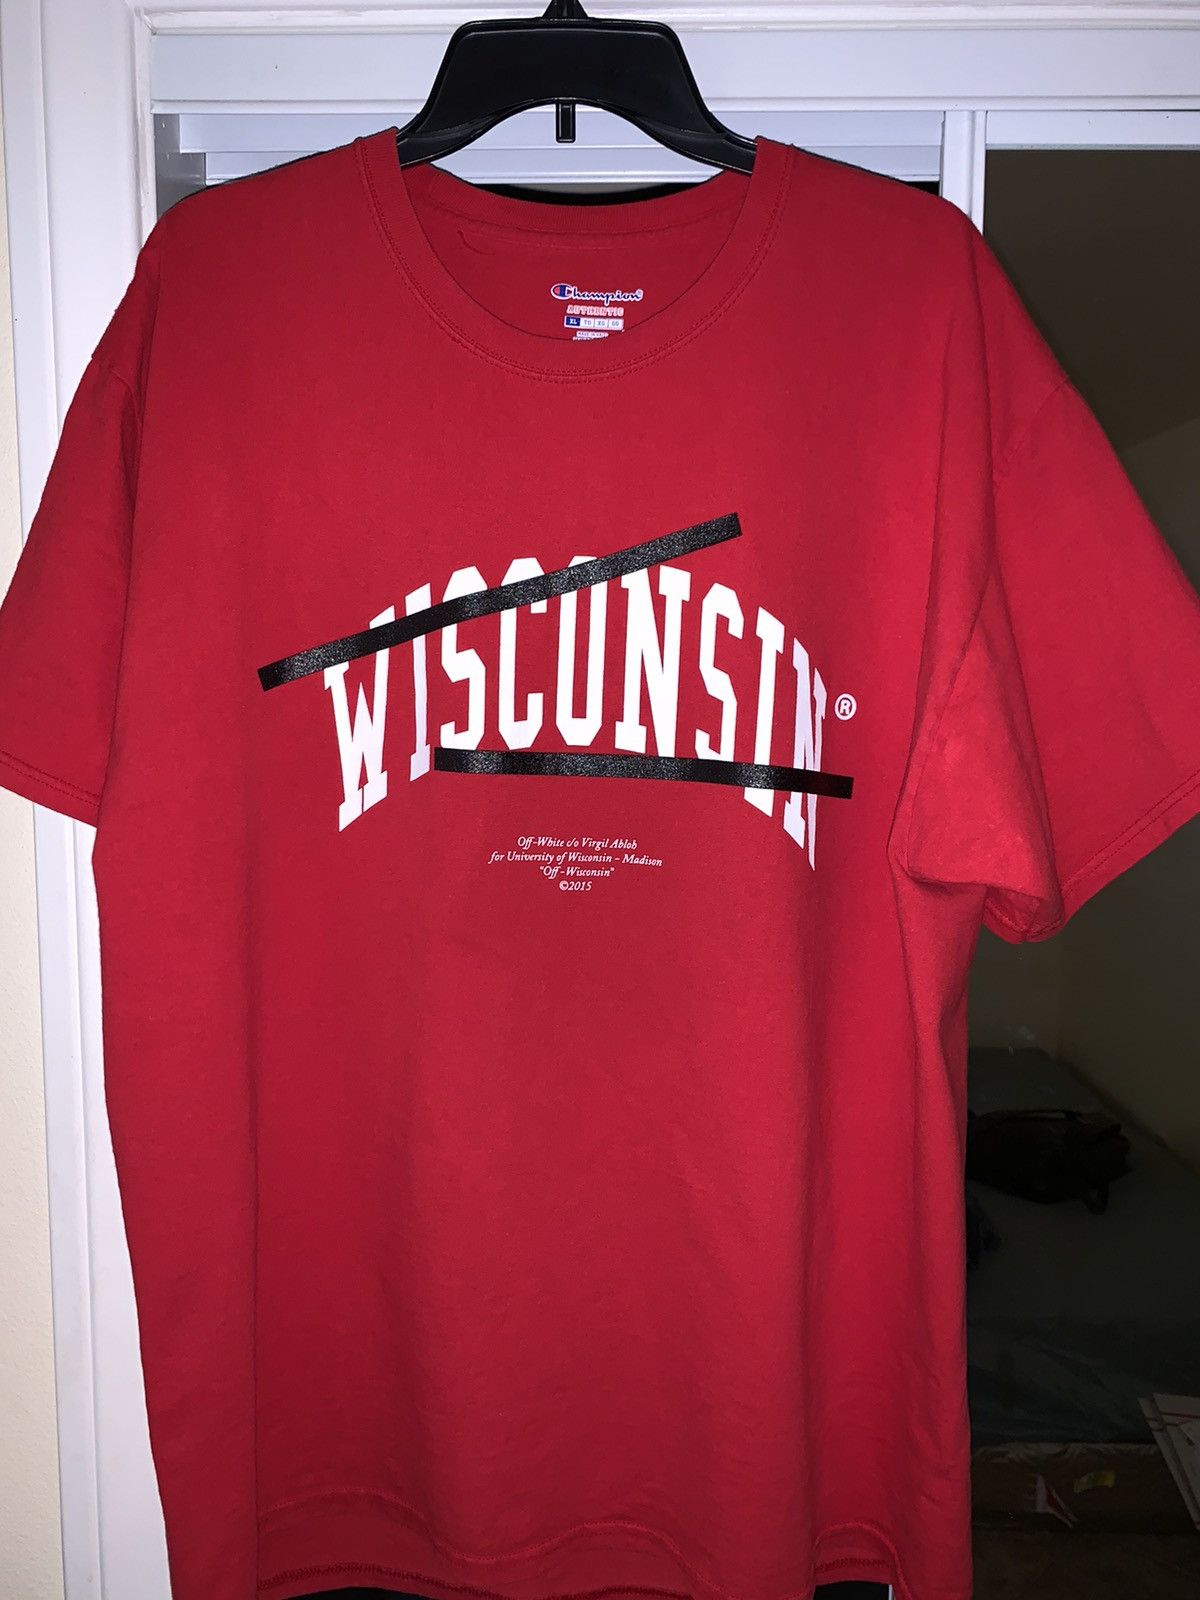 Off-White Off-White Wisconsin 2015 Tee | Grailed